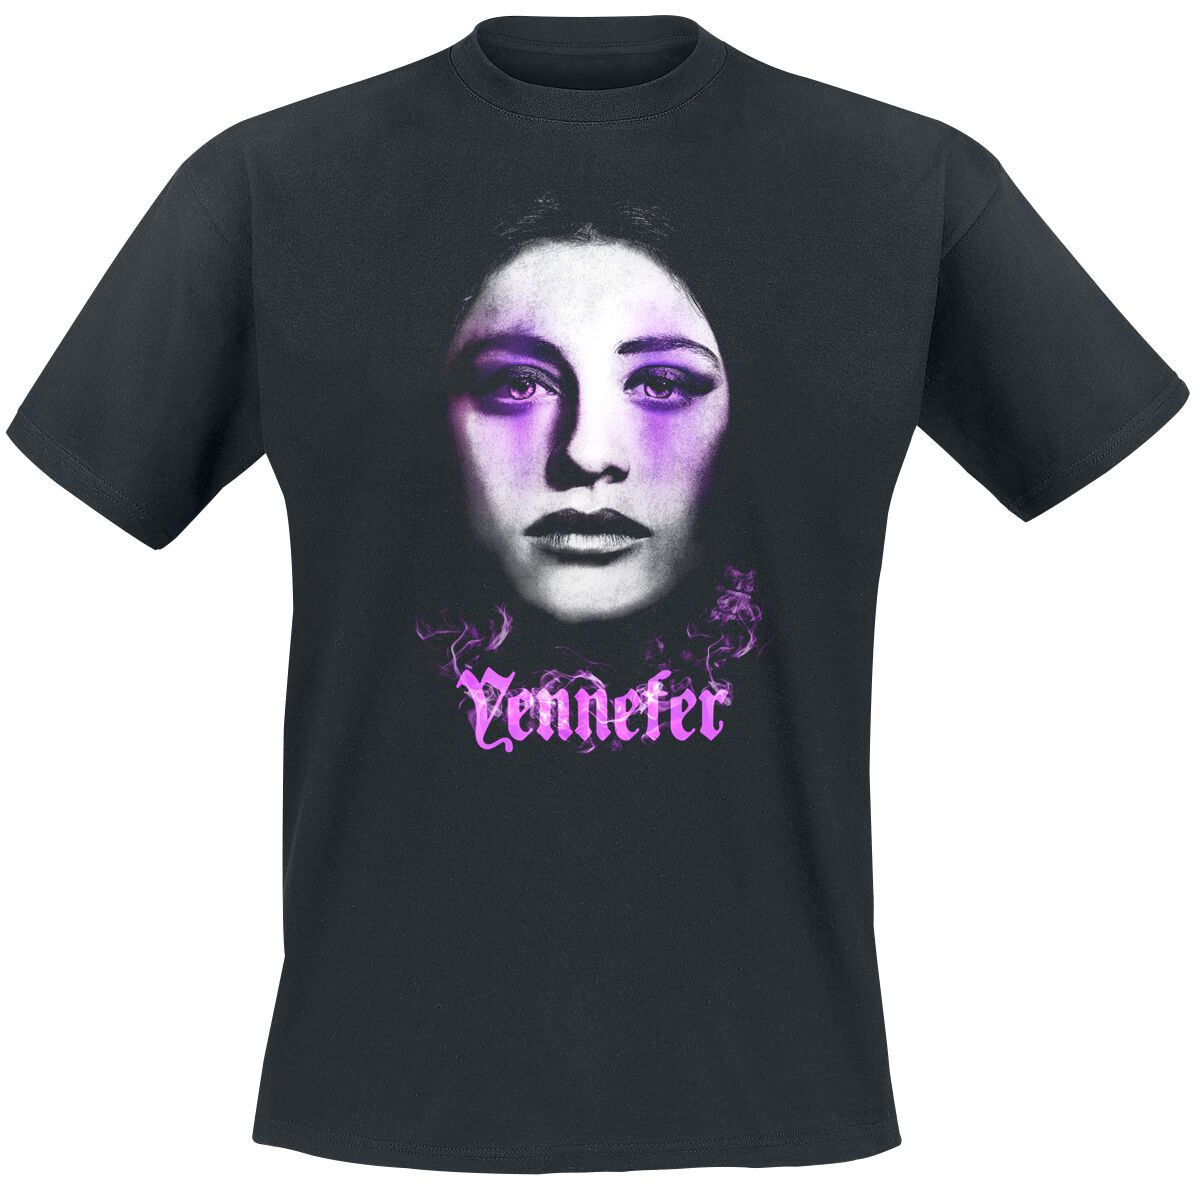 The Witcher Yennefer T-Shirt black